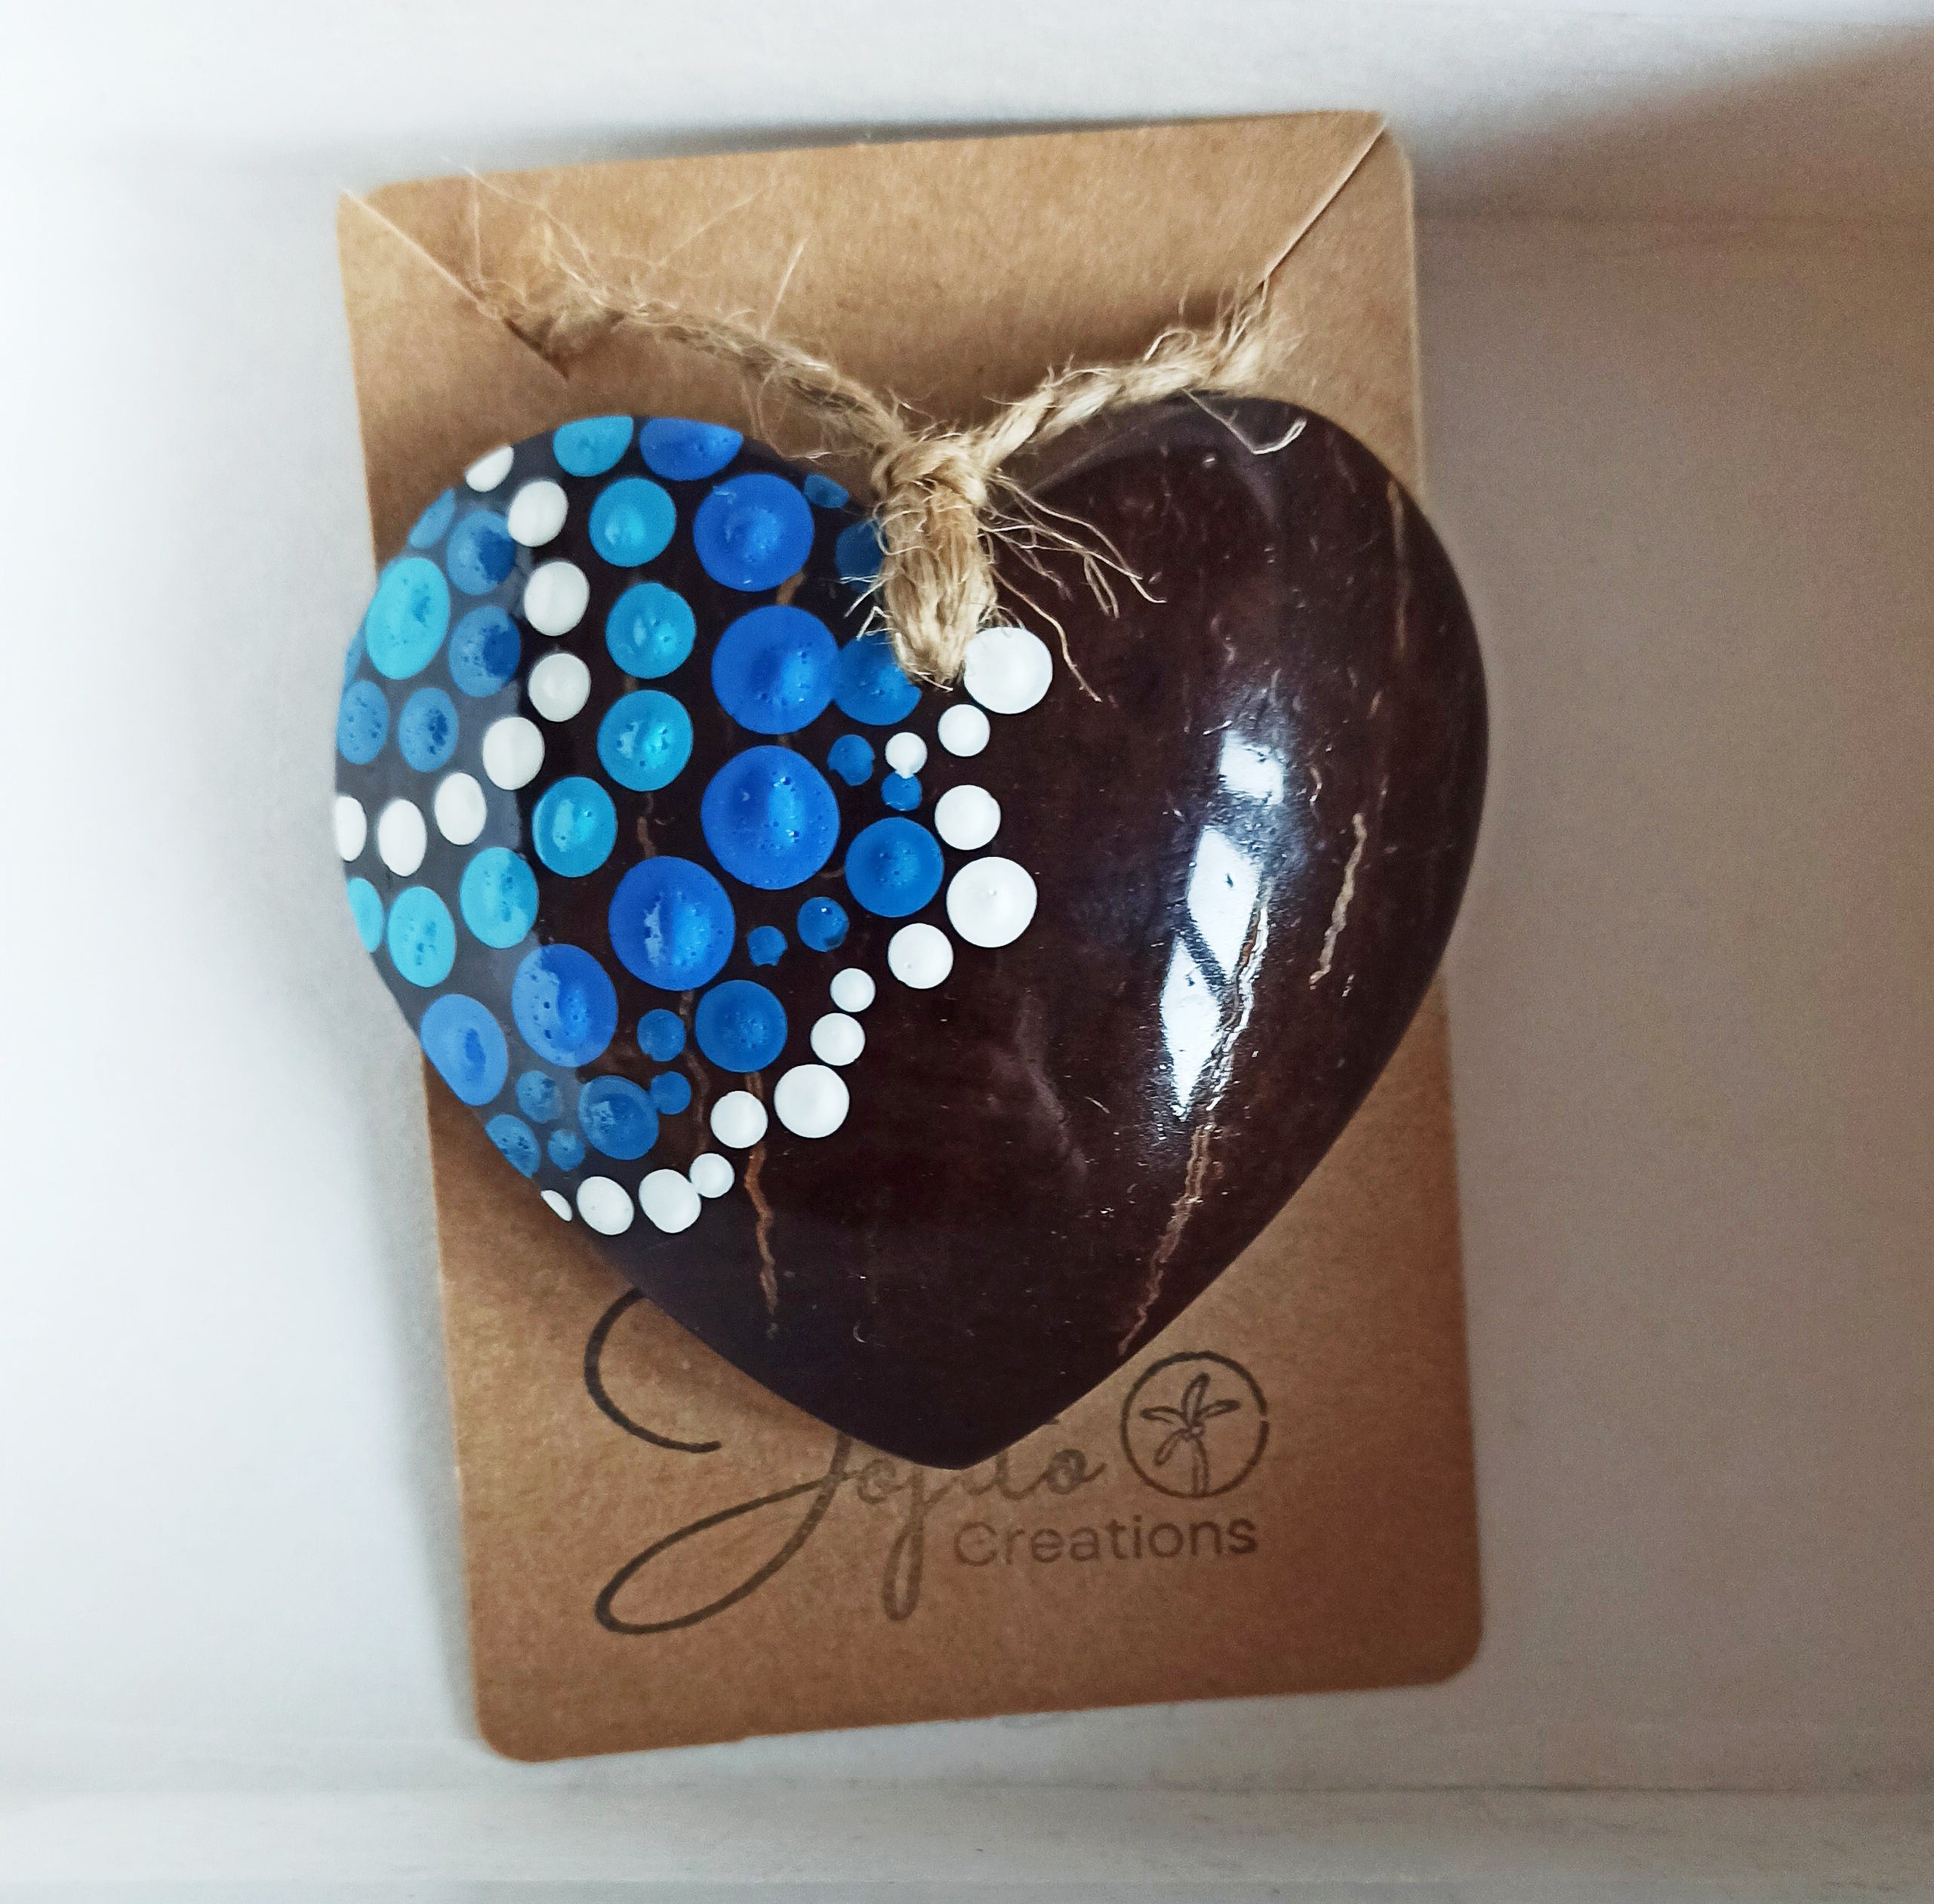 Set of 4 Handmade Brown Coconut Shell Heart Ornaments - With Our Hearts